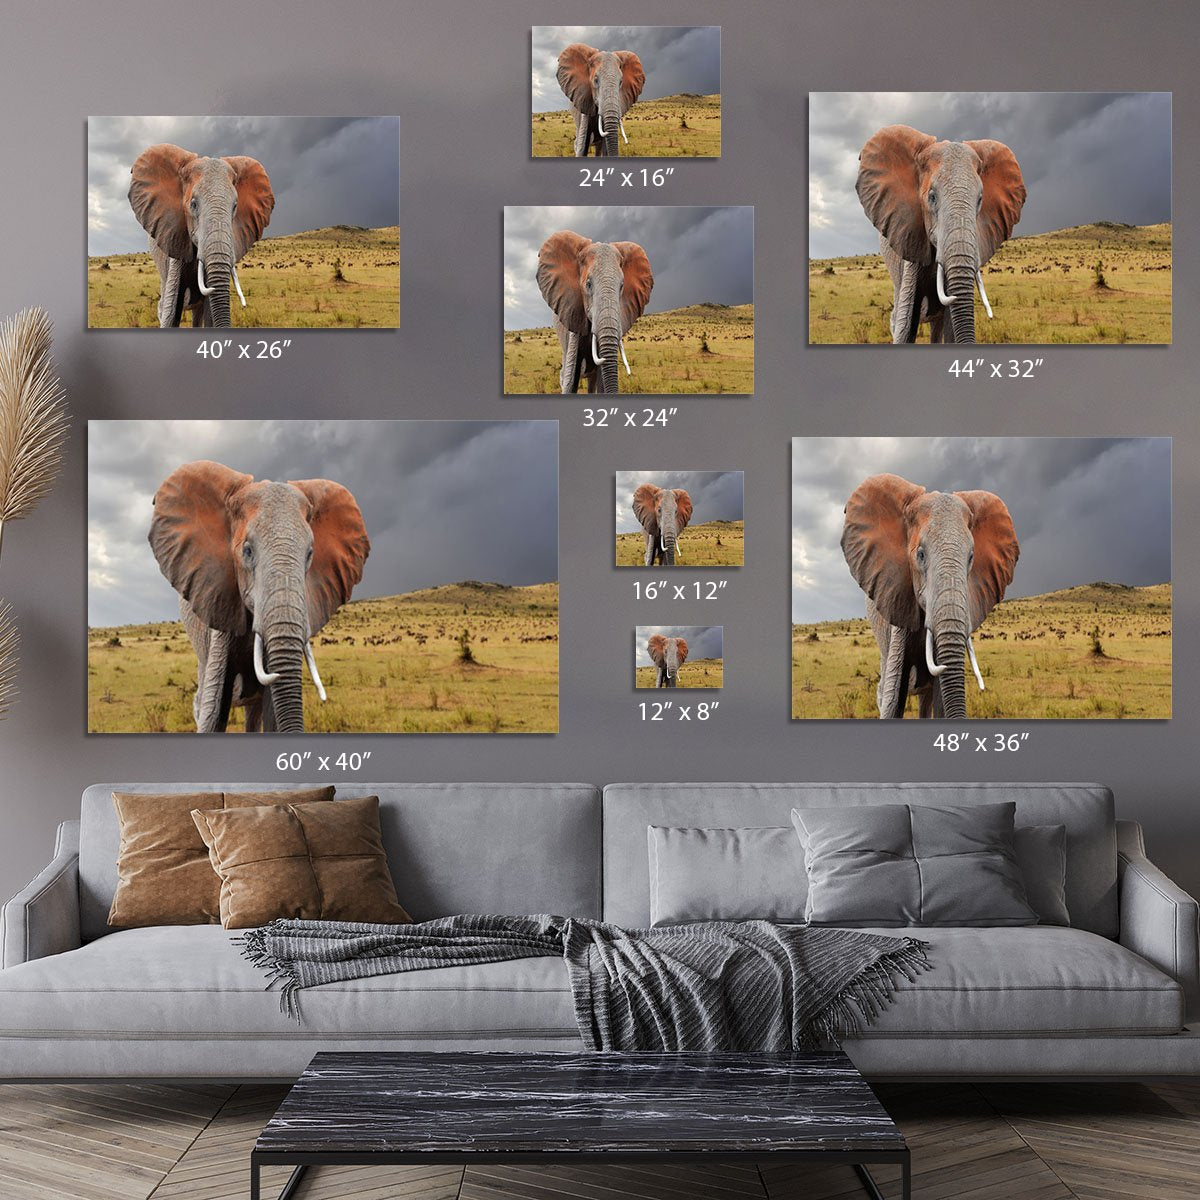 Elephant in National park of Kenya Canvas Print or Poster